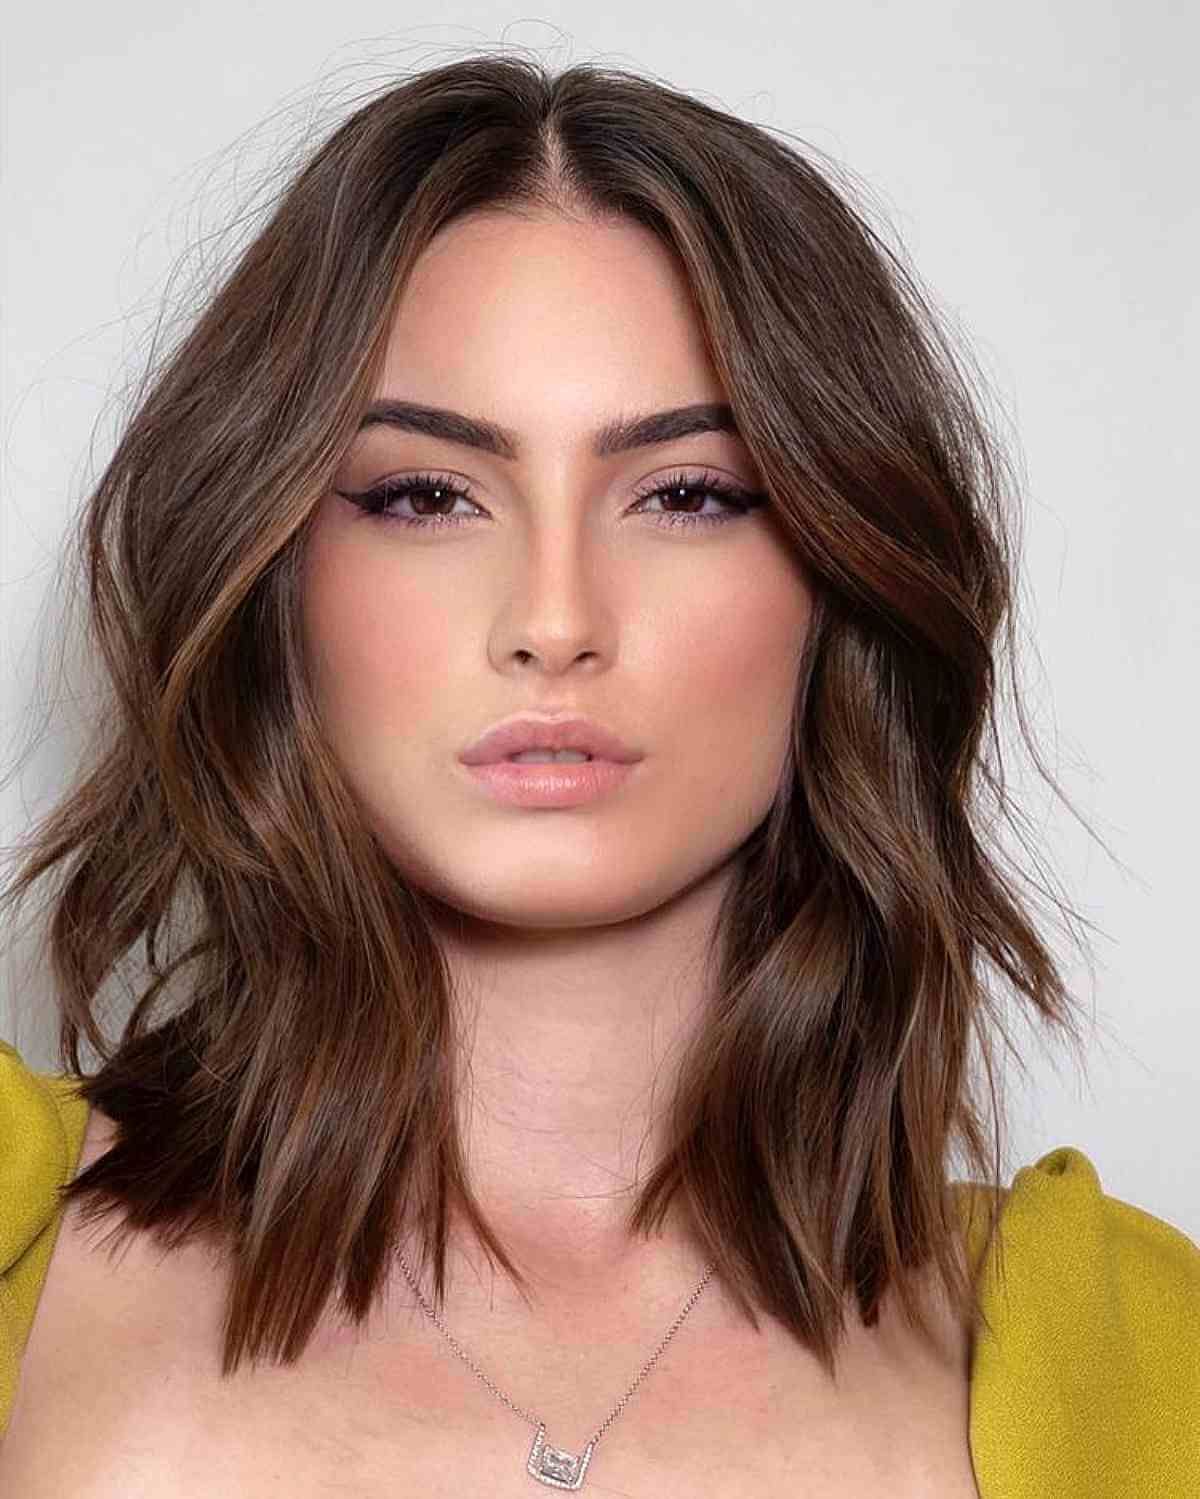 Medium Hairstyle for Oblong face Shape 8 Hairstyle for long face thin hair | Medium hairstyles for oblong faces | Short hairstyles for oblong faces Medium Hairstyles for Oblong Face Shape Women